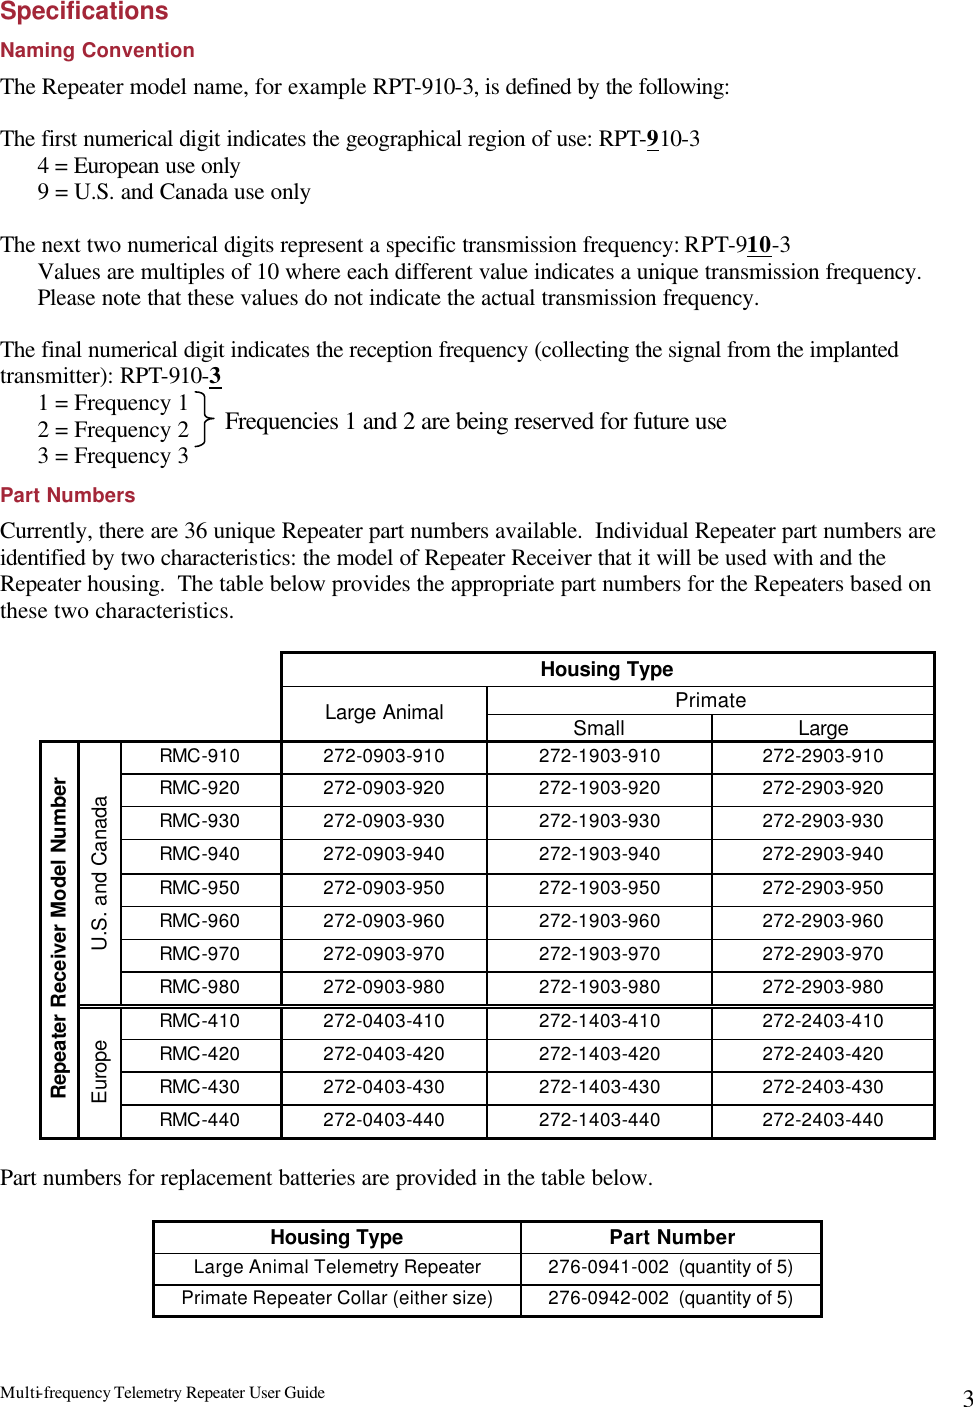 Multi-frequency Telemetry Repeater User Guide      3Specifications Naming Convention The Repeater model name, for example RPT-910-3, is defined by the following:  The first numerical digit indicates the geographical region of use: RPT-910-3 4 = European use only 9 = U.S. and Canada use only  The next two numerical digits represent a specific transmission frequency: RPT-910-3 Values are multiples of 10 where each different value indicates a unique transmission frequency.  Please note that these values do not indicate the actual transmission frequency.  The final numerical digit indicates the reception frequency (collecting the signal from the implanted transmitter): RPT-910-3  1 = Frequency 1 2 = Frequency 2 3 = Frequency 3 Part Numbers Currently, there are 36 unique Repeater part numbers available.  Individual Repeater part numbers are identified by two characteristics: the model of Repeater Receiver that it will be used with and the Repeater housing.  The table below provides the appropriate part numbers for the Repeaters based on these two characteristics.    Housing Type Primate  Large Animal Small Large RMC-910 272-0903-910 272-1903-910 272-2903-910 RMC-920 272-0903-920 272-1903-920 272-2903-920 RMC-930 272-0903-930 272-1903-930 272-2903-930 RMC-940 272-0903-940 272-1903-940 272-2903-940 RMC-950 272-0903-950 272-1903-950 272-2903-950 RMC-960 272-0903-960 272-1903-960 272-2903-960 RMC-970 272-0903-970 272-1903-970 272-2903-970 U.S. and Canada RMC-980 272-0903-980 272-1903-980 272-2903-980 RMC-410 272-0403-410 272-1403-410 272-2403-410 RMC-420 272-0403-420 272-1403-420 272-2403-420 RMC-430 272-0403-430 272-1403-430 272-2403-430 Repeater Receiver Model Number Europe RMC-440 272-0403-440 272-1403-440 272-2403-440  Part numbers for replacement batteries are provided in the table below.  Housing Type Part Number Large Animal Telemetry Repeater 276-0941-002  (quantity of 5) Primate Repeater Collar (either size) 276-0942-002  (quantity of 5)  Frequencies 1 and 2 are being reserved for future use 